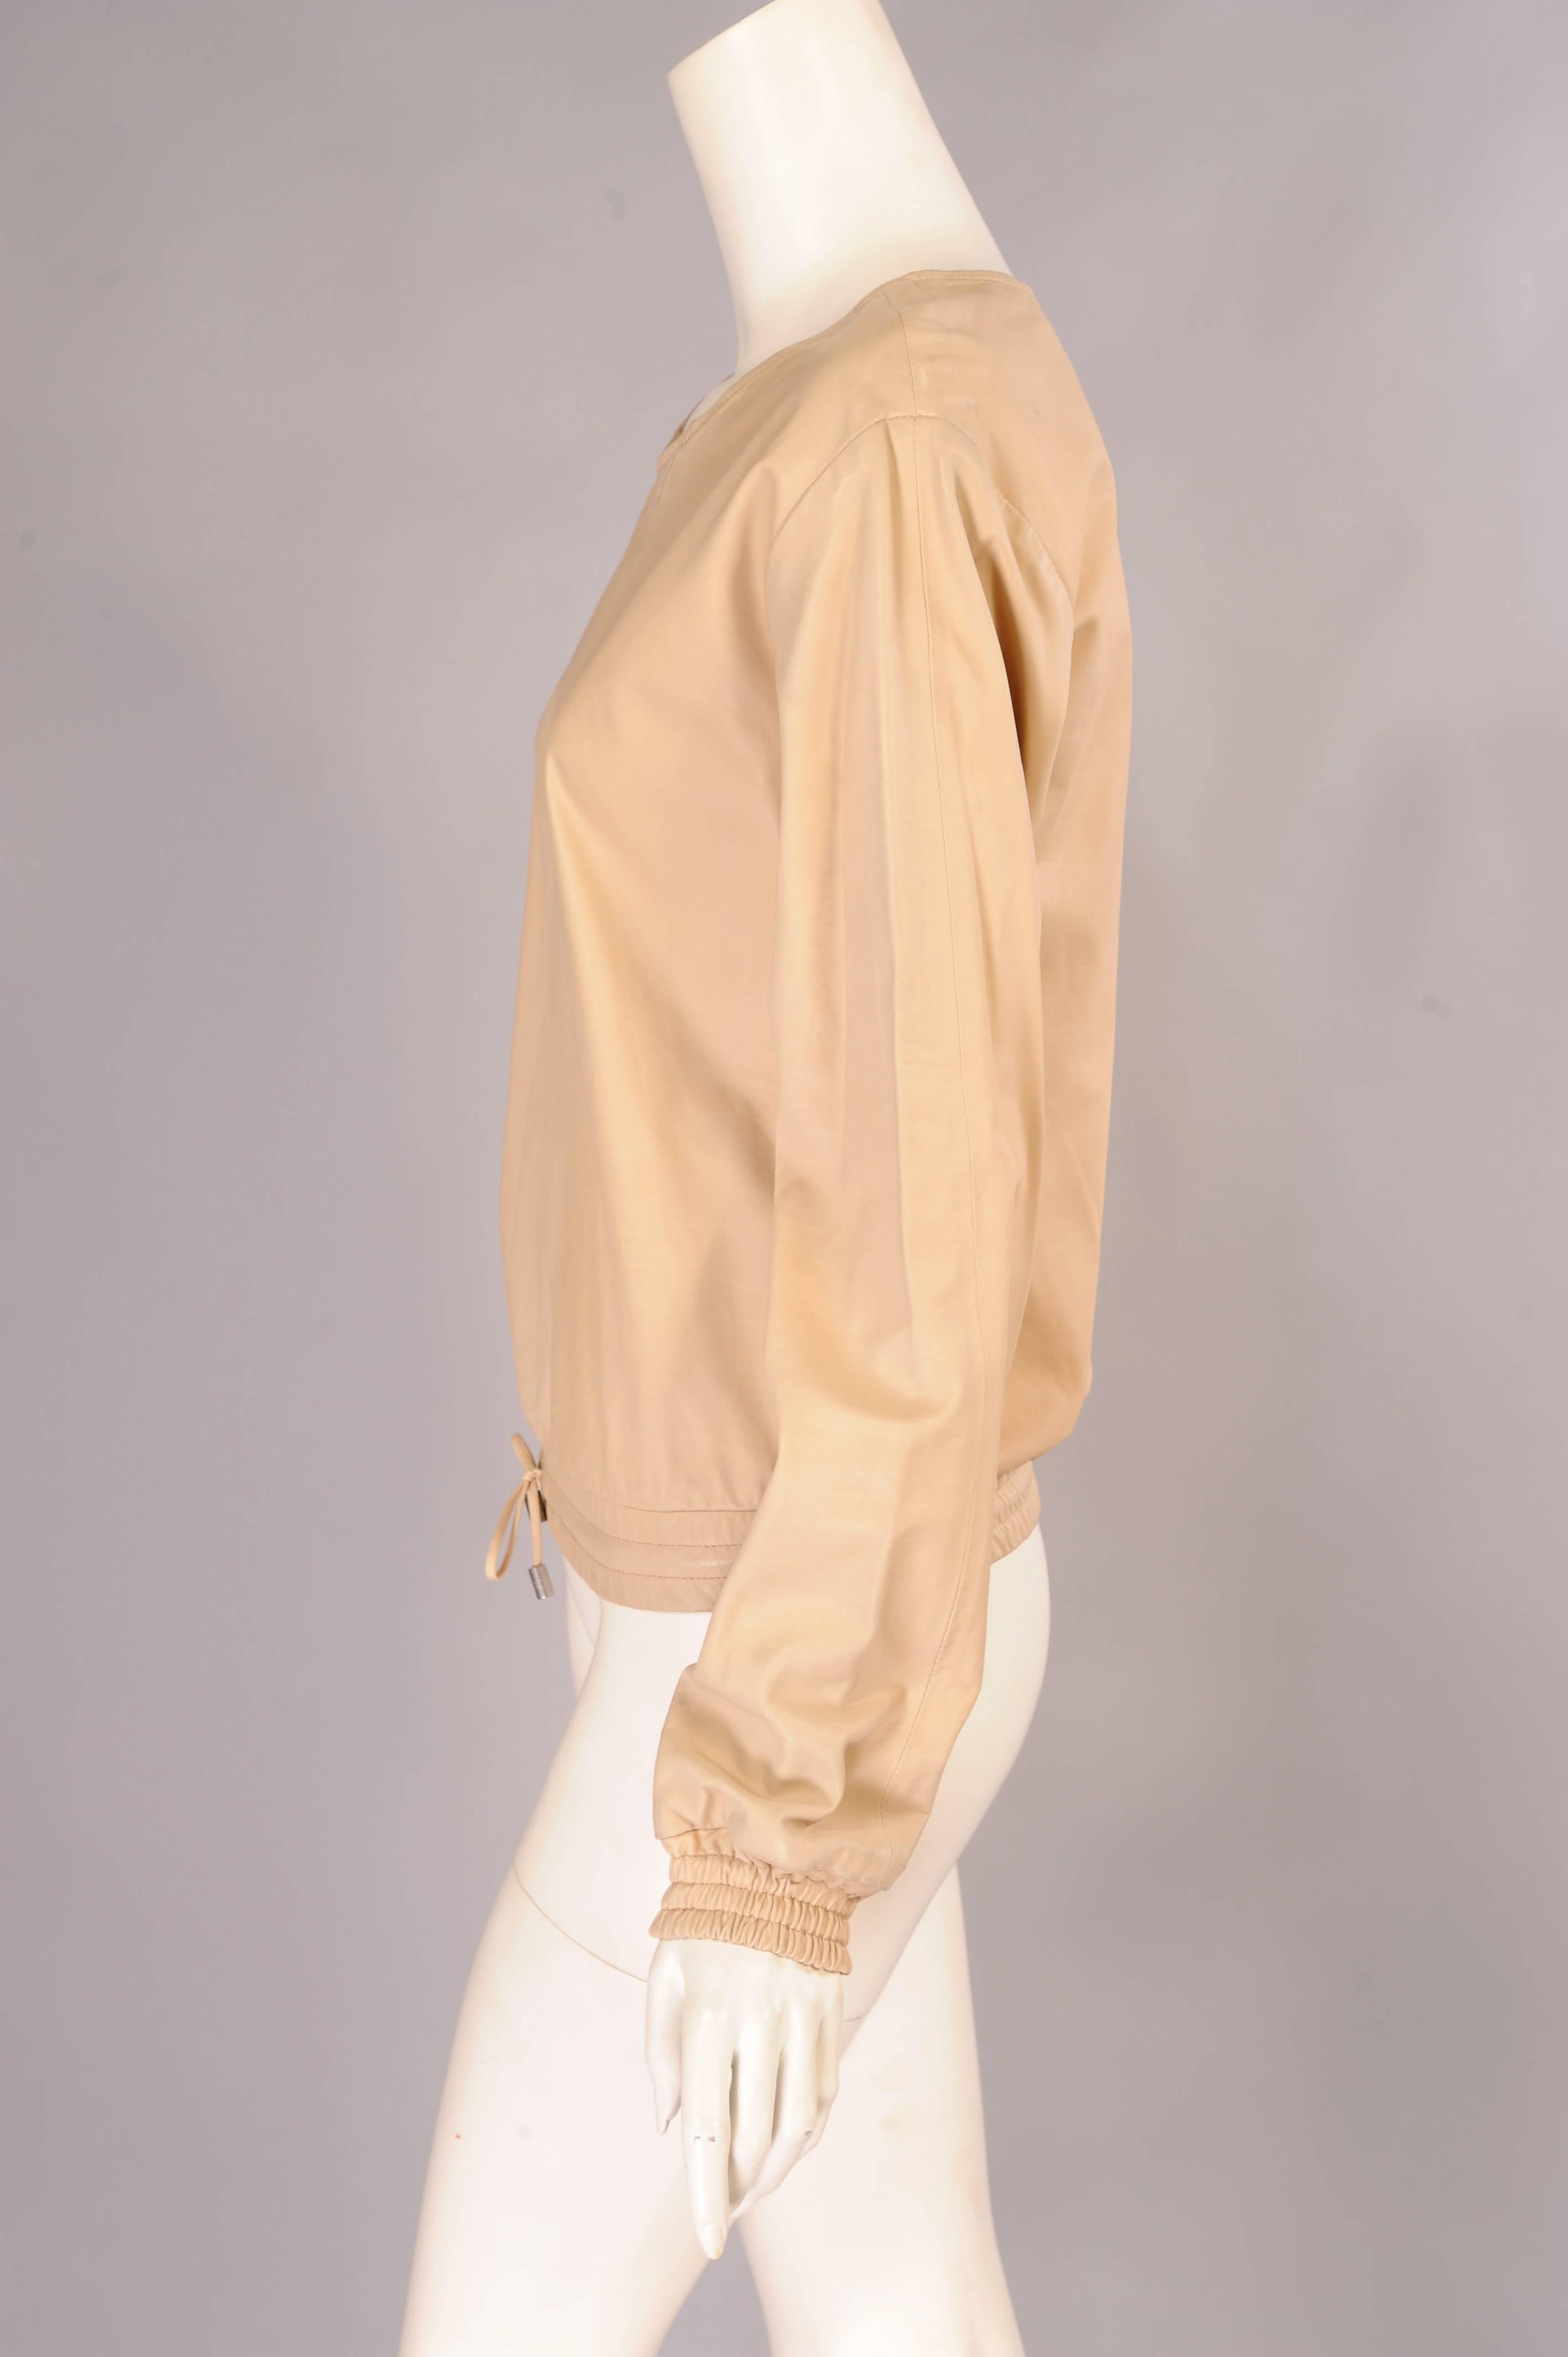 Designed like a sweatshirt this pale beige calfskin pullover top from the Chanel Boutique line is accented with elasticized cuffs and waistband. The waist also has a drawstring with silver toned metal tips bearing the Chanel logo. This piece is in